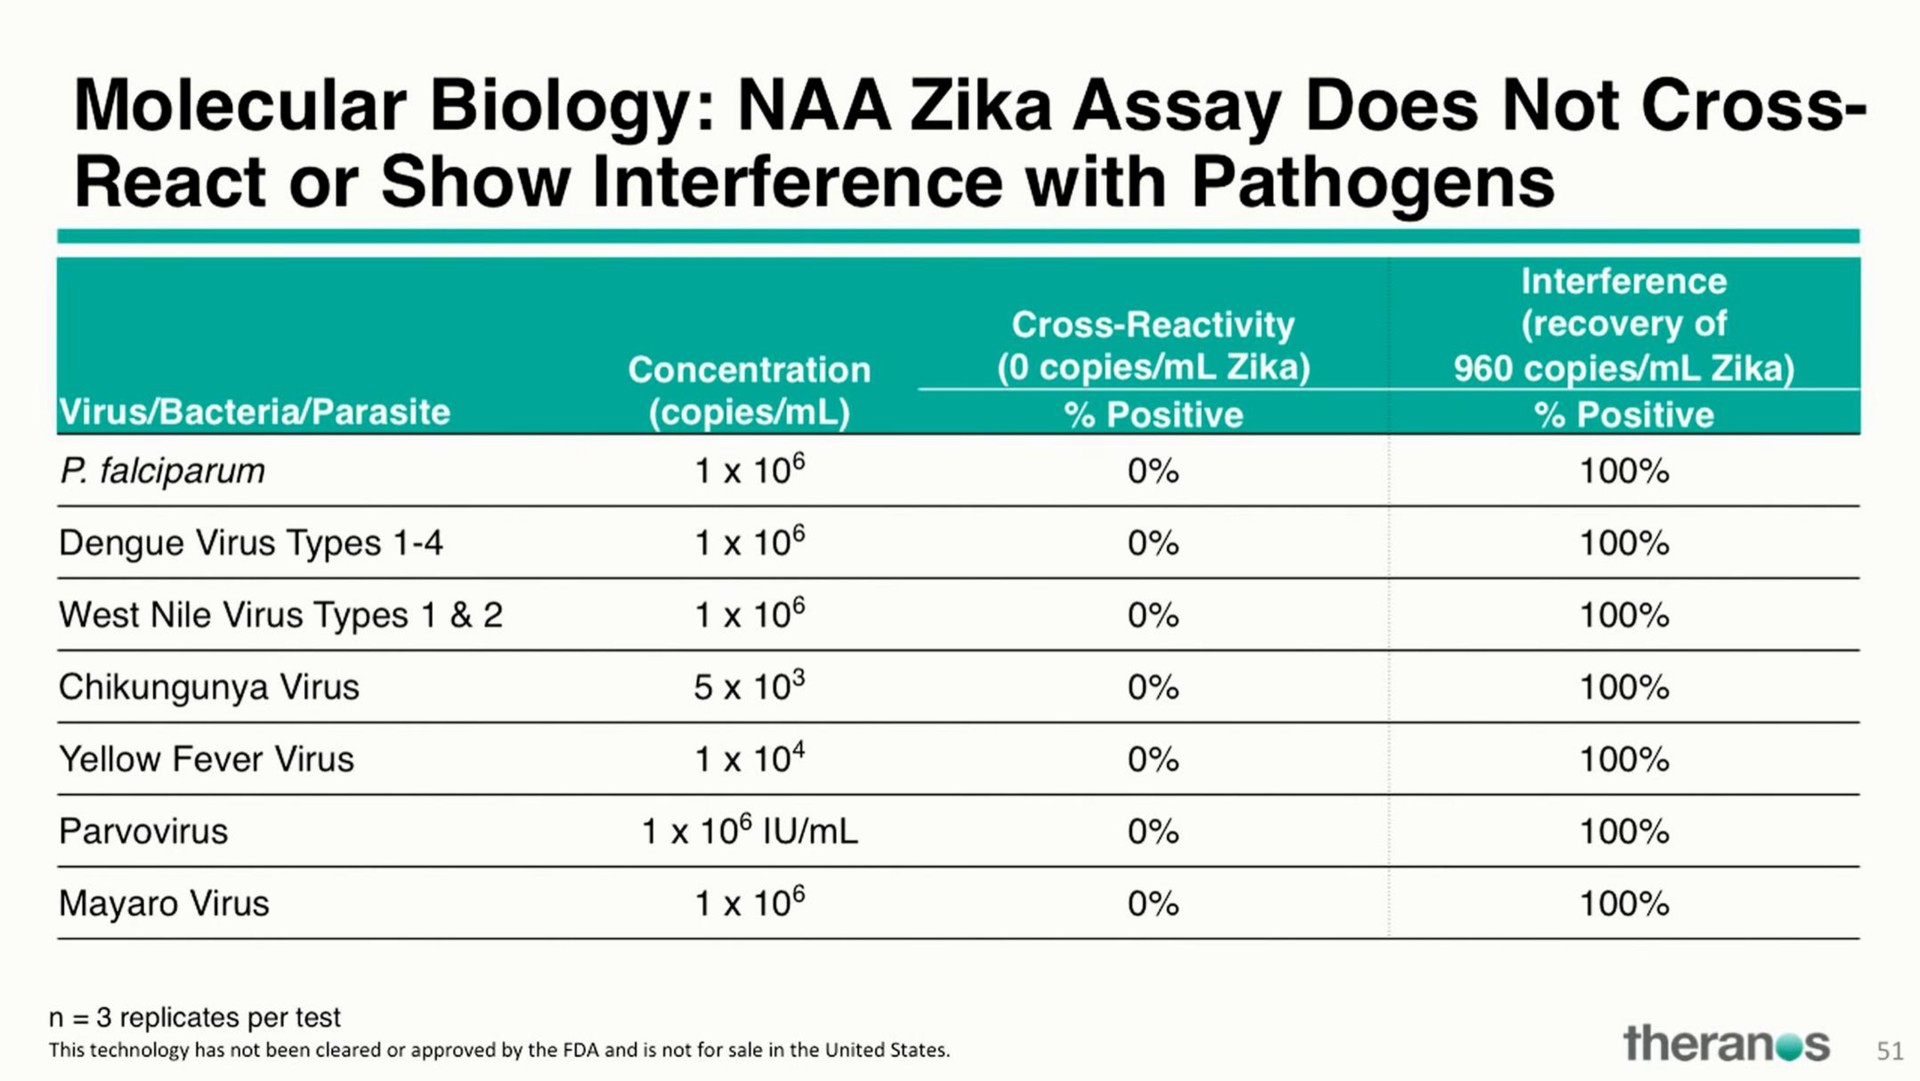 molecular biology naa assay does not cross react or show interference with pathogens | Theranos